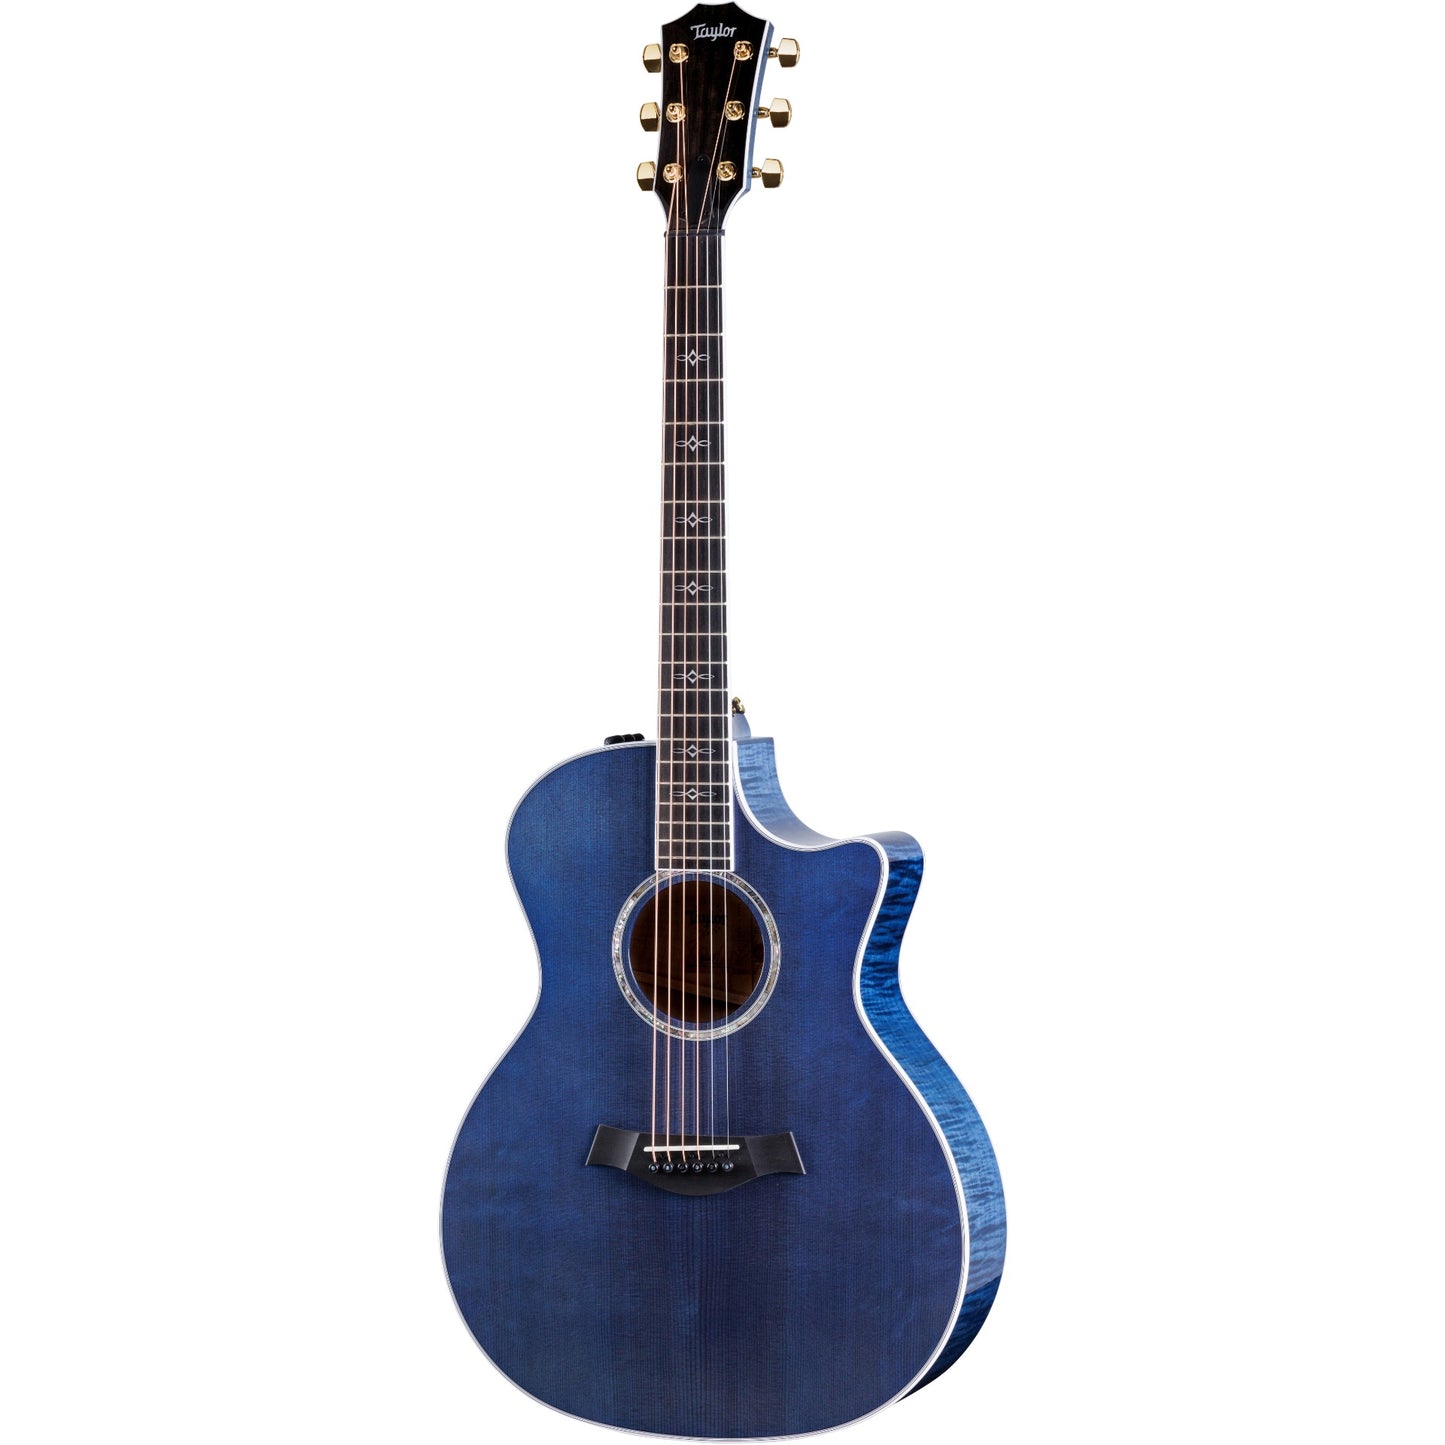 Taylor 614ce Special Edition Acoustic Electric Guitar - Pacific Blue